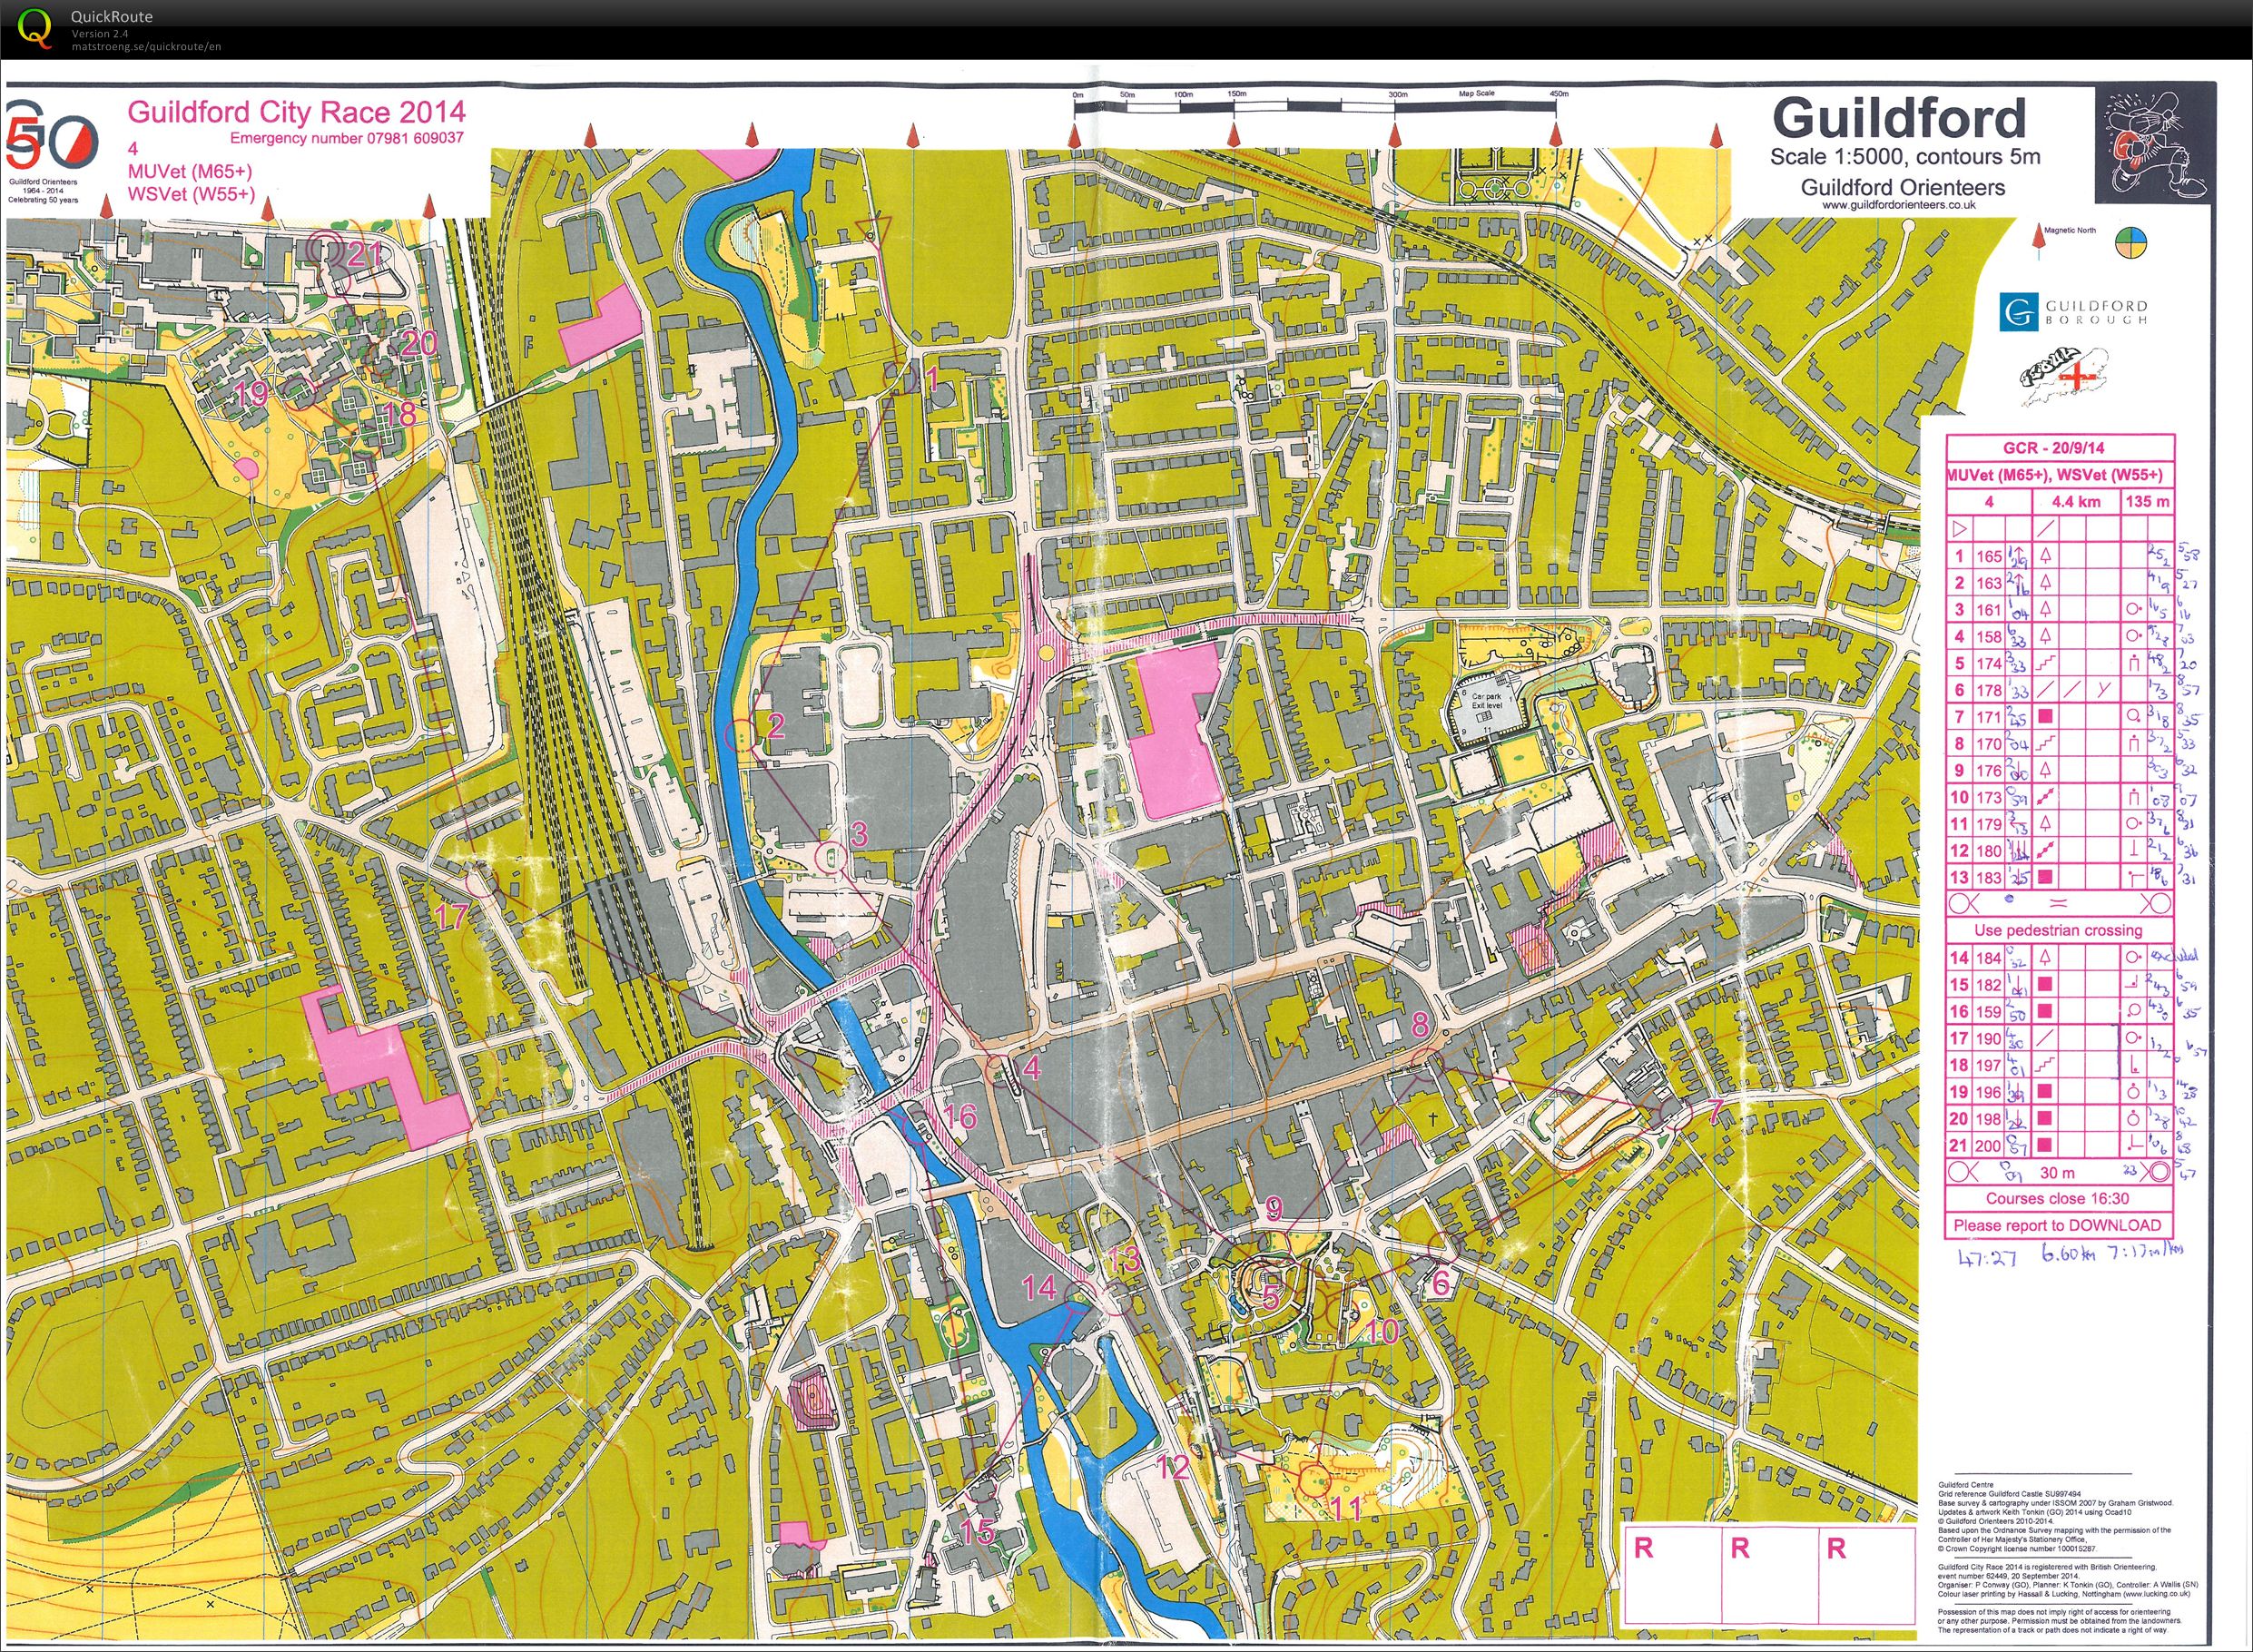 Guildford Urban Race (2014-09-20)